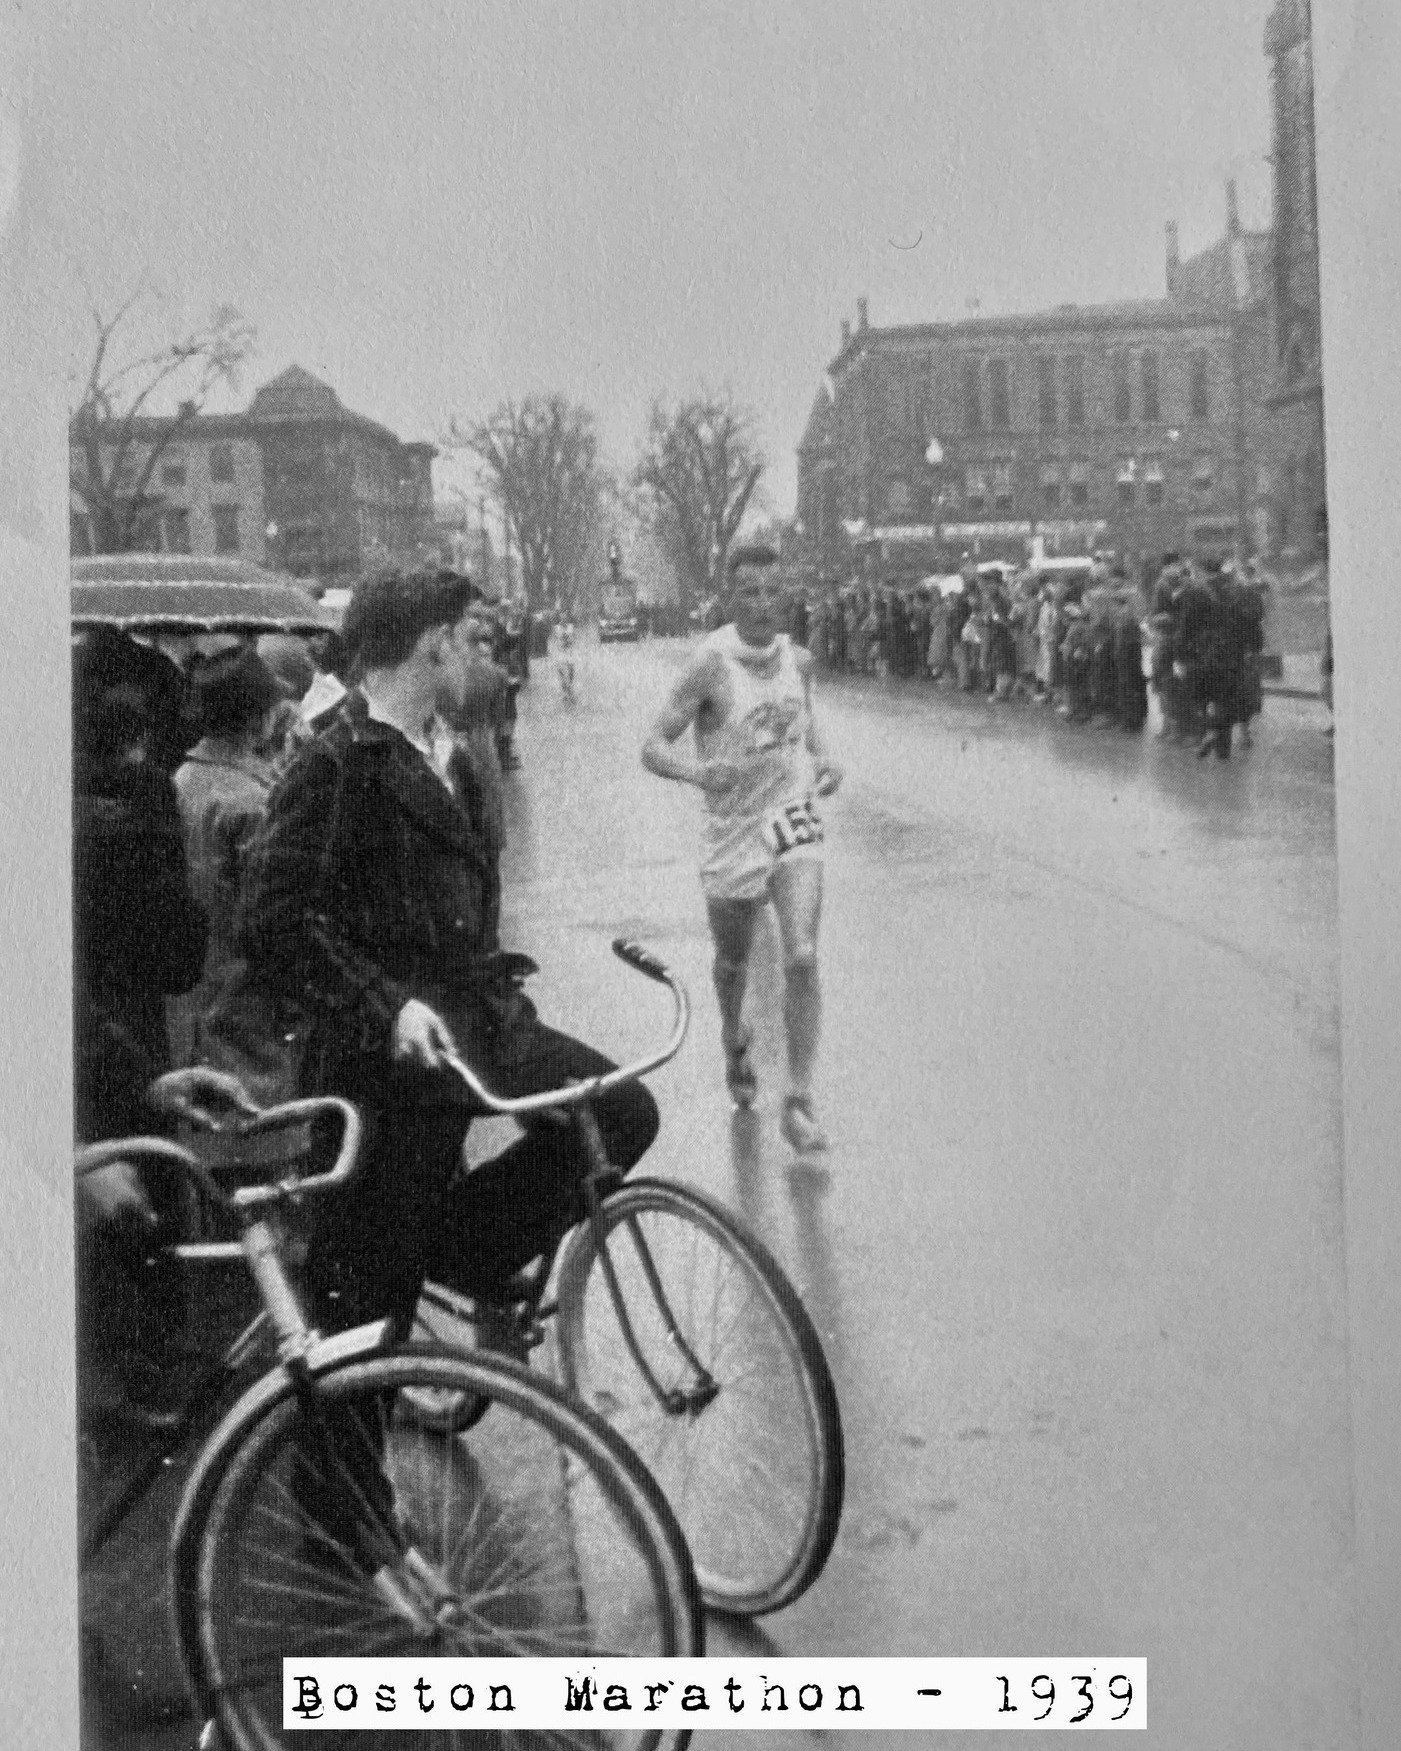 Wishing all runners of the Boston Marathon the best of luck! The following photos are from the year 1939. We hope you enjoy them.#runner  #PatriotsDay #vintage #metrowestma #oldschool #photography #natickma #bostonmarathon #bostonma